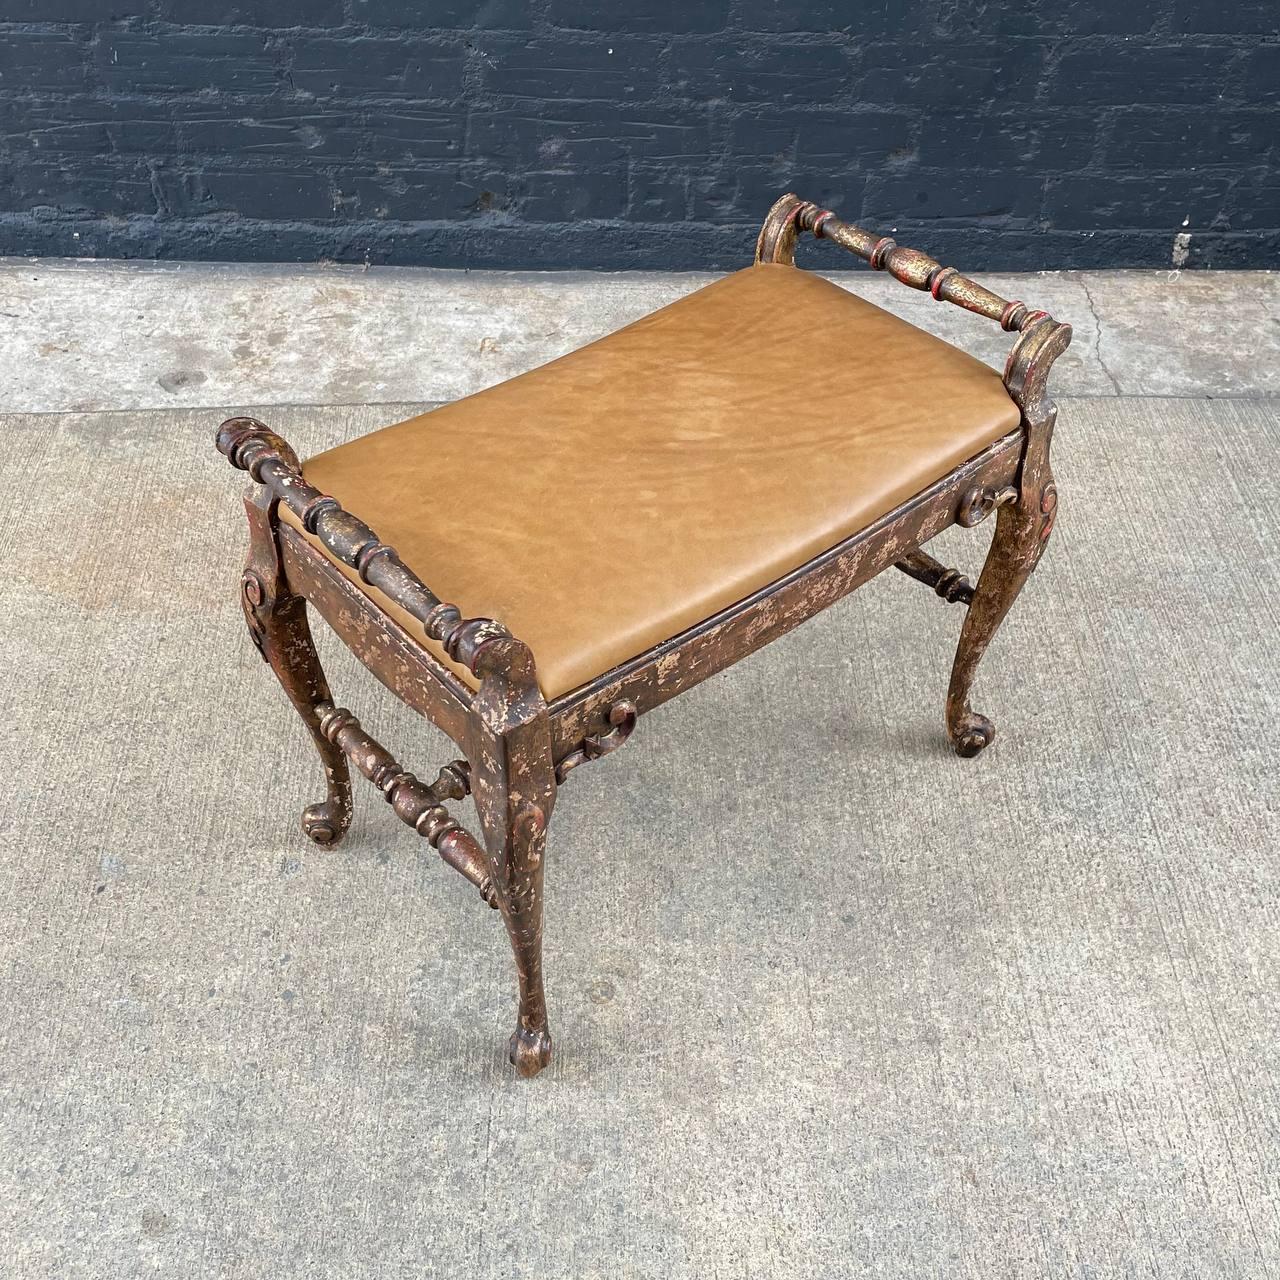 Mid-20th Century English Style Gilt Wood & Leather Bench with Cabriole Legs For Sale